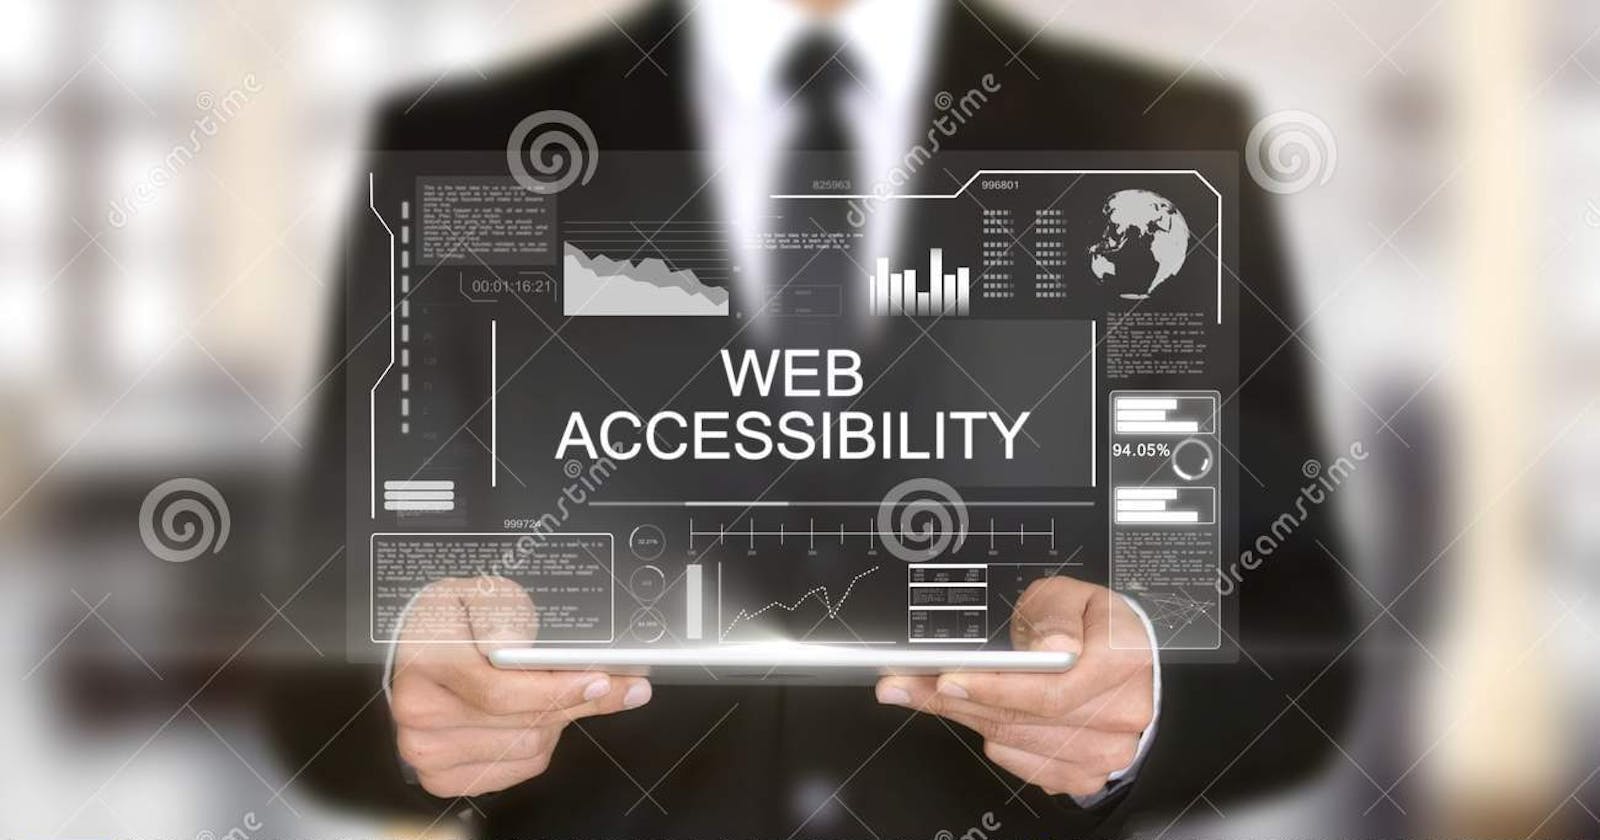 10 ways to increase web accessibility